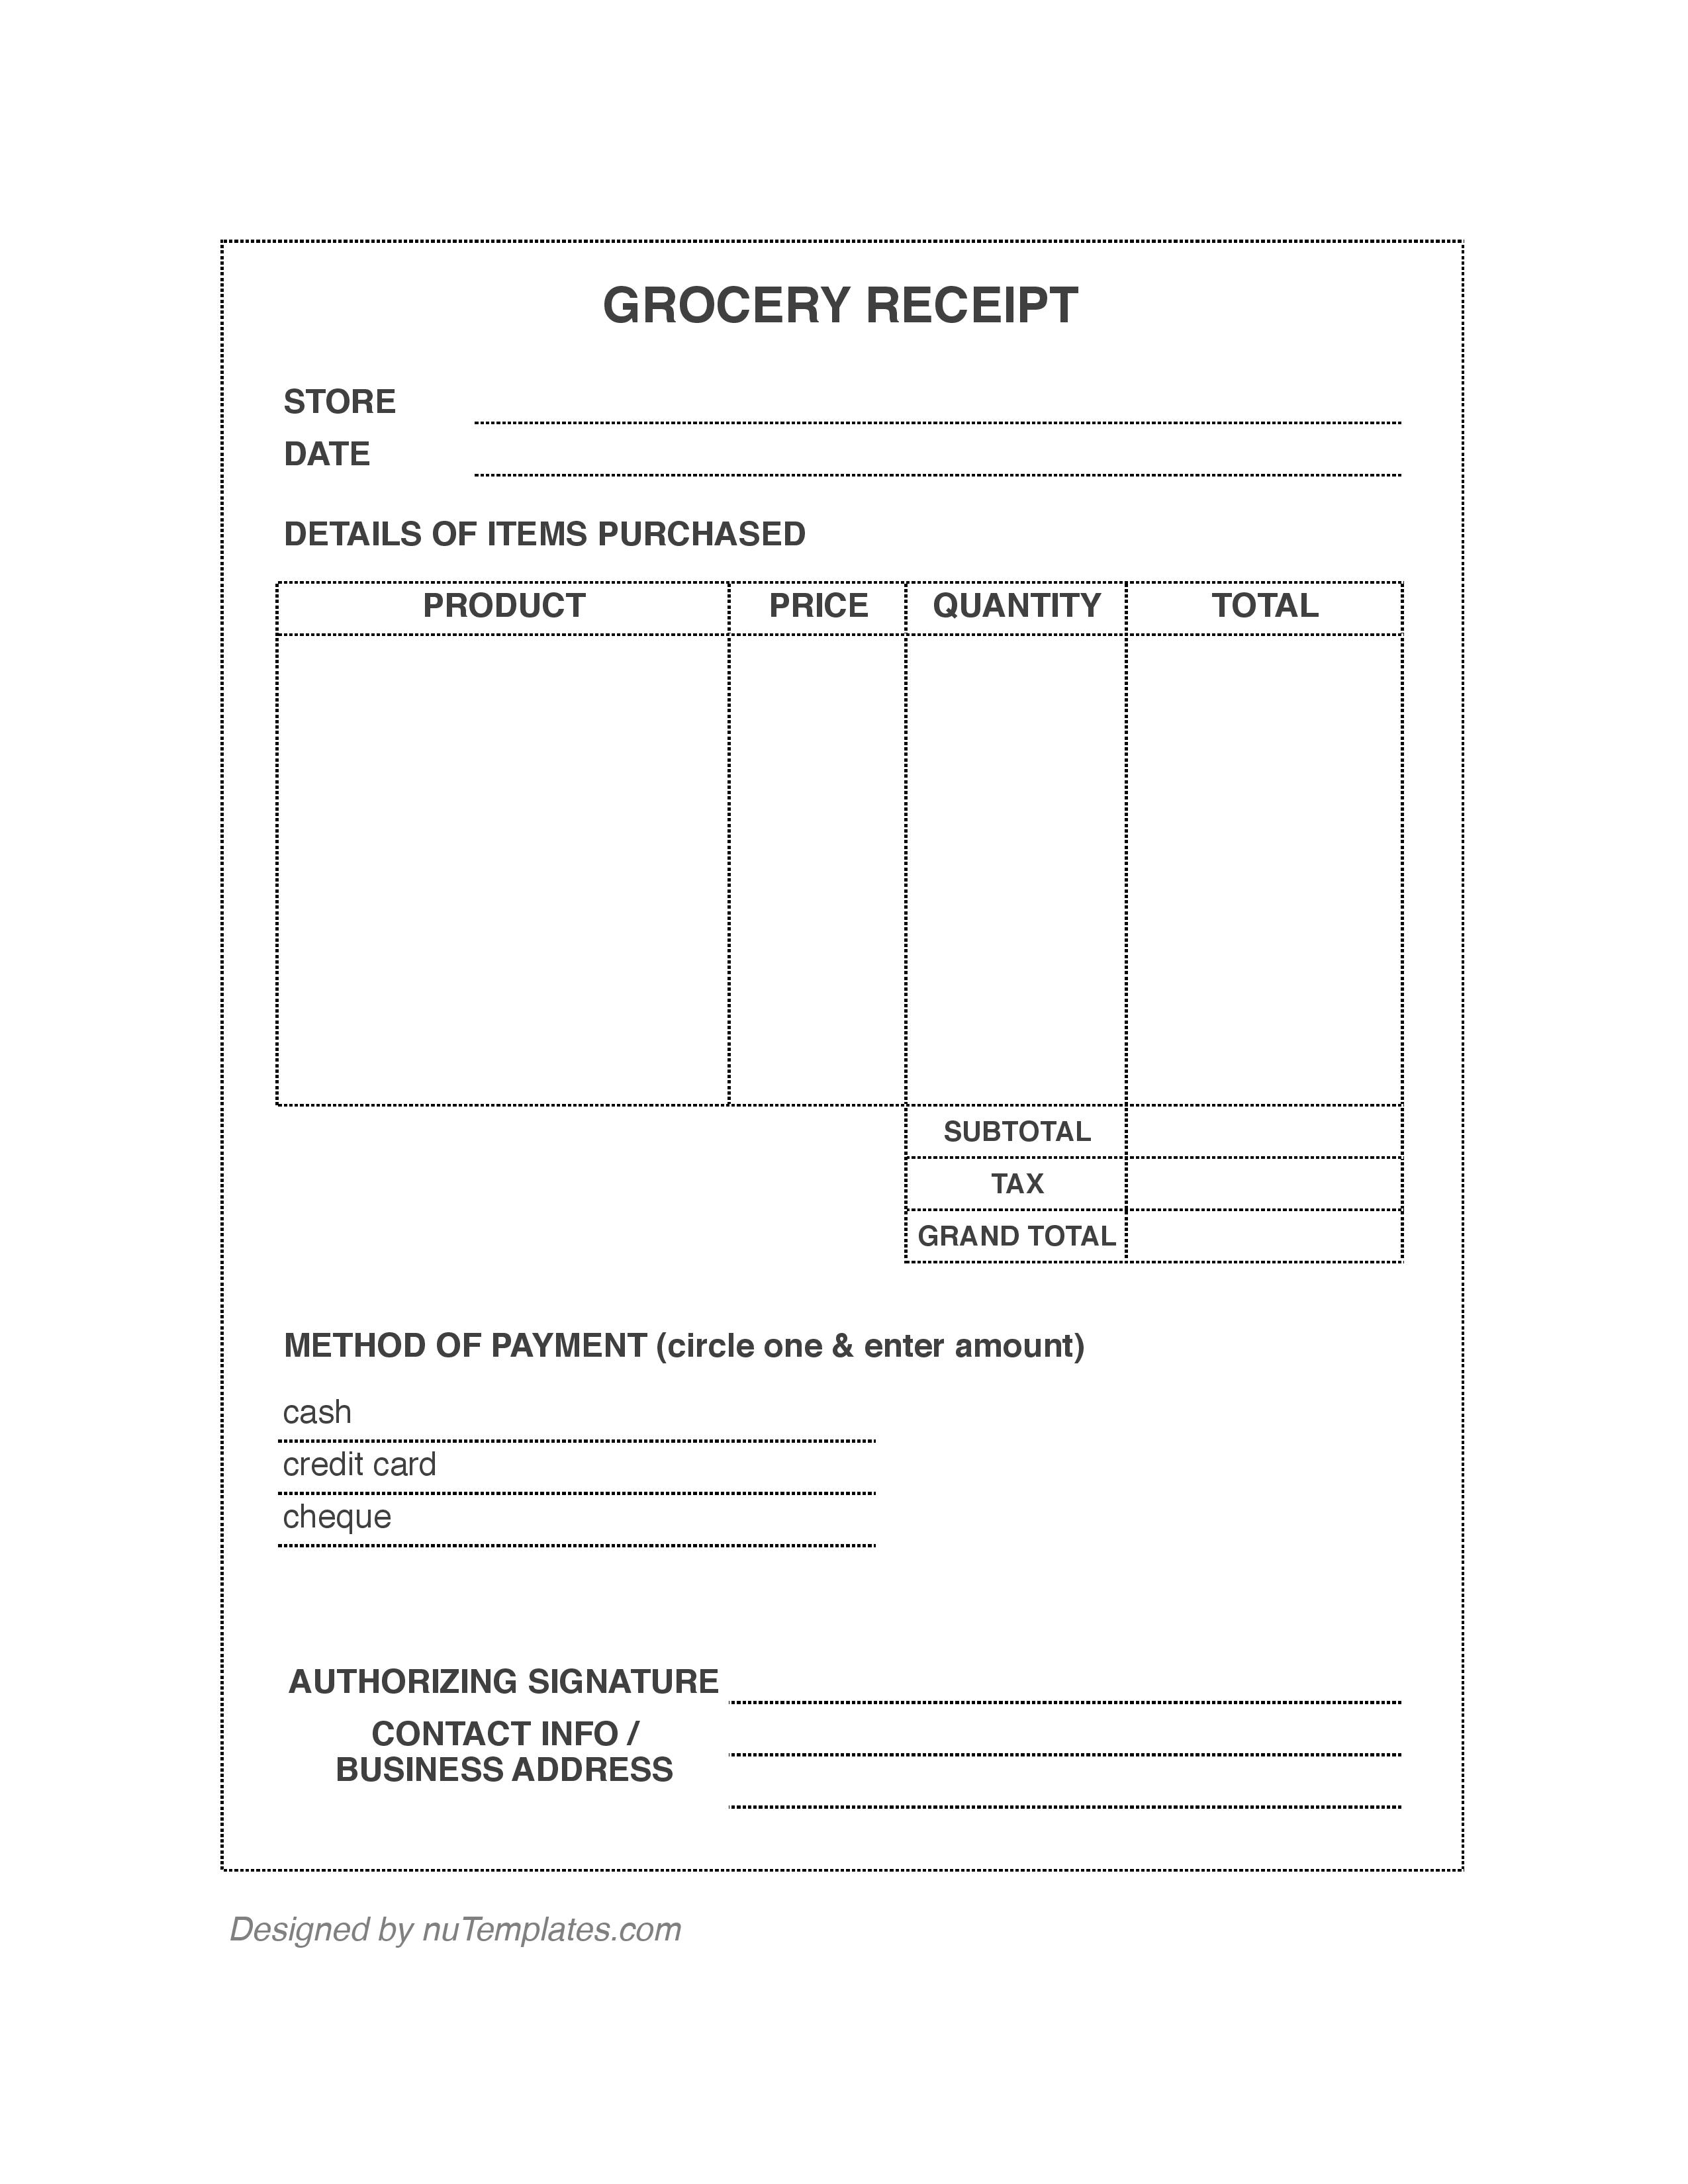 Grocery Receipt Template Grocery Receipts nuTemplates